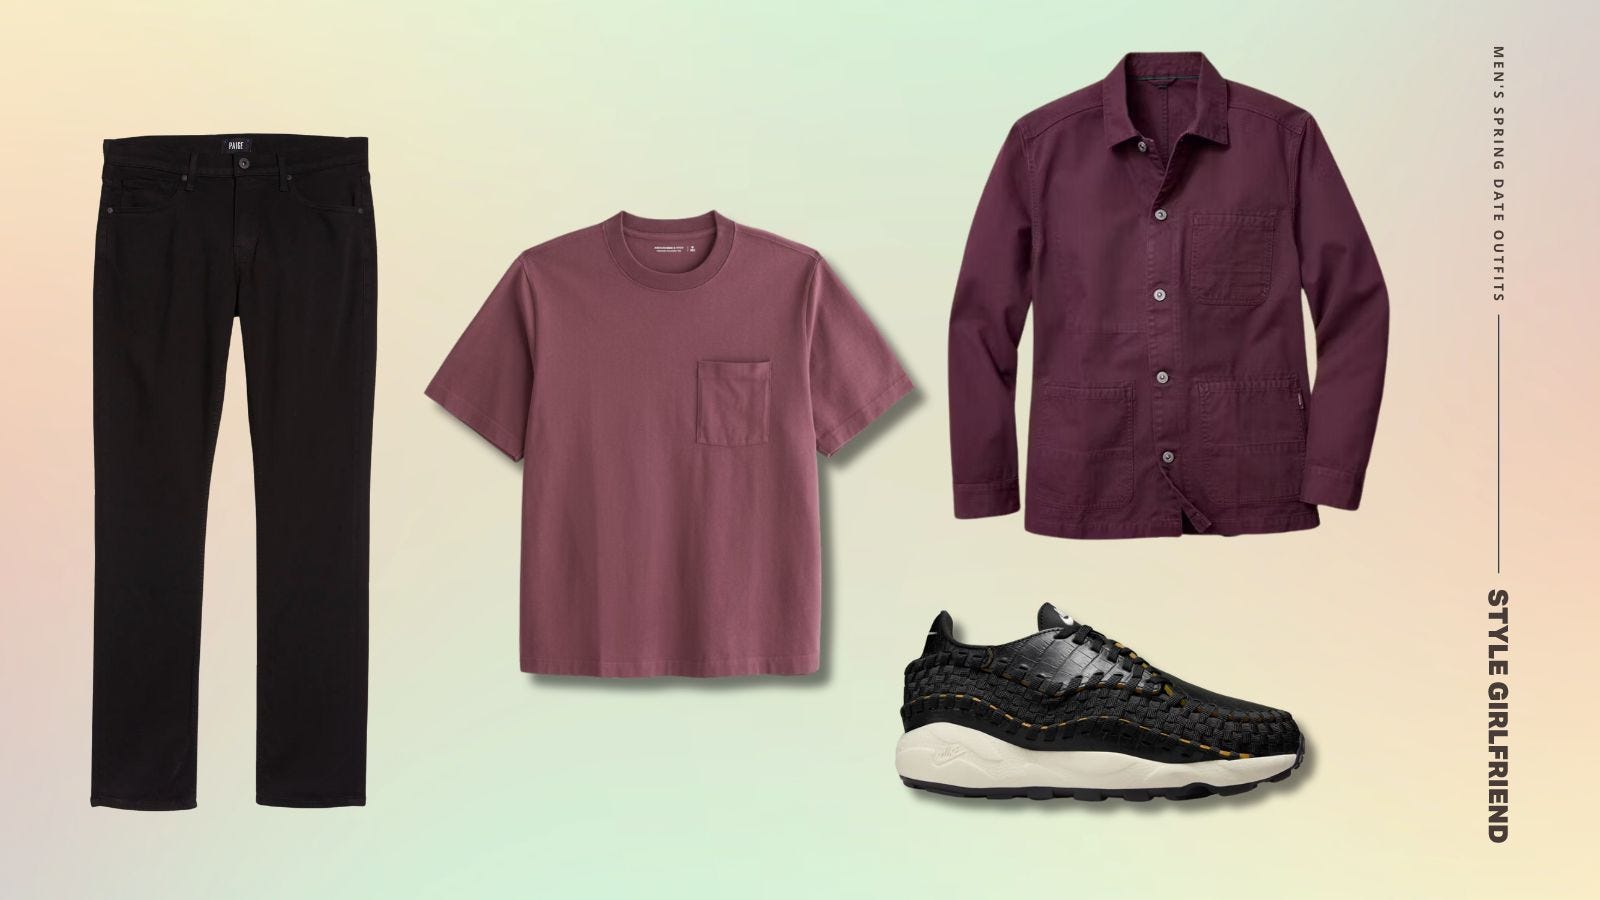 men's outfit featuring black jeans, maroon t-shirt and shirt jacket, and black low-top sneakers